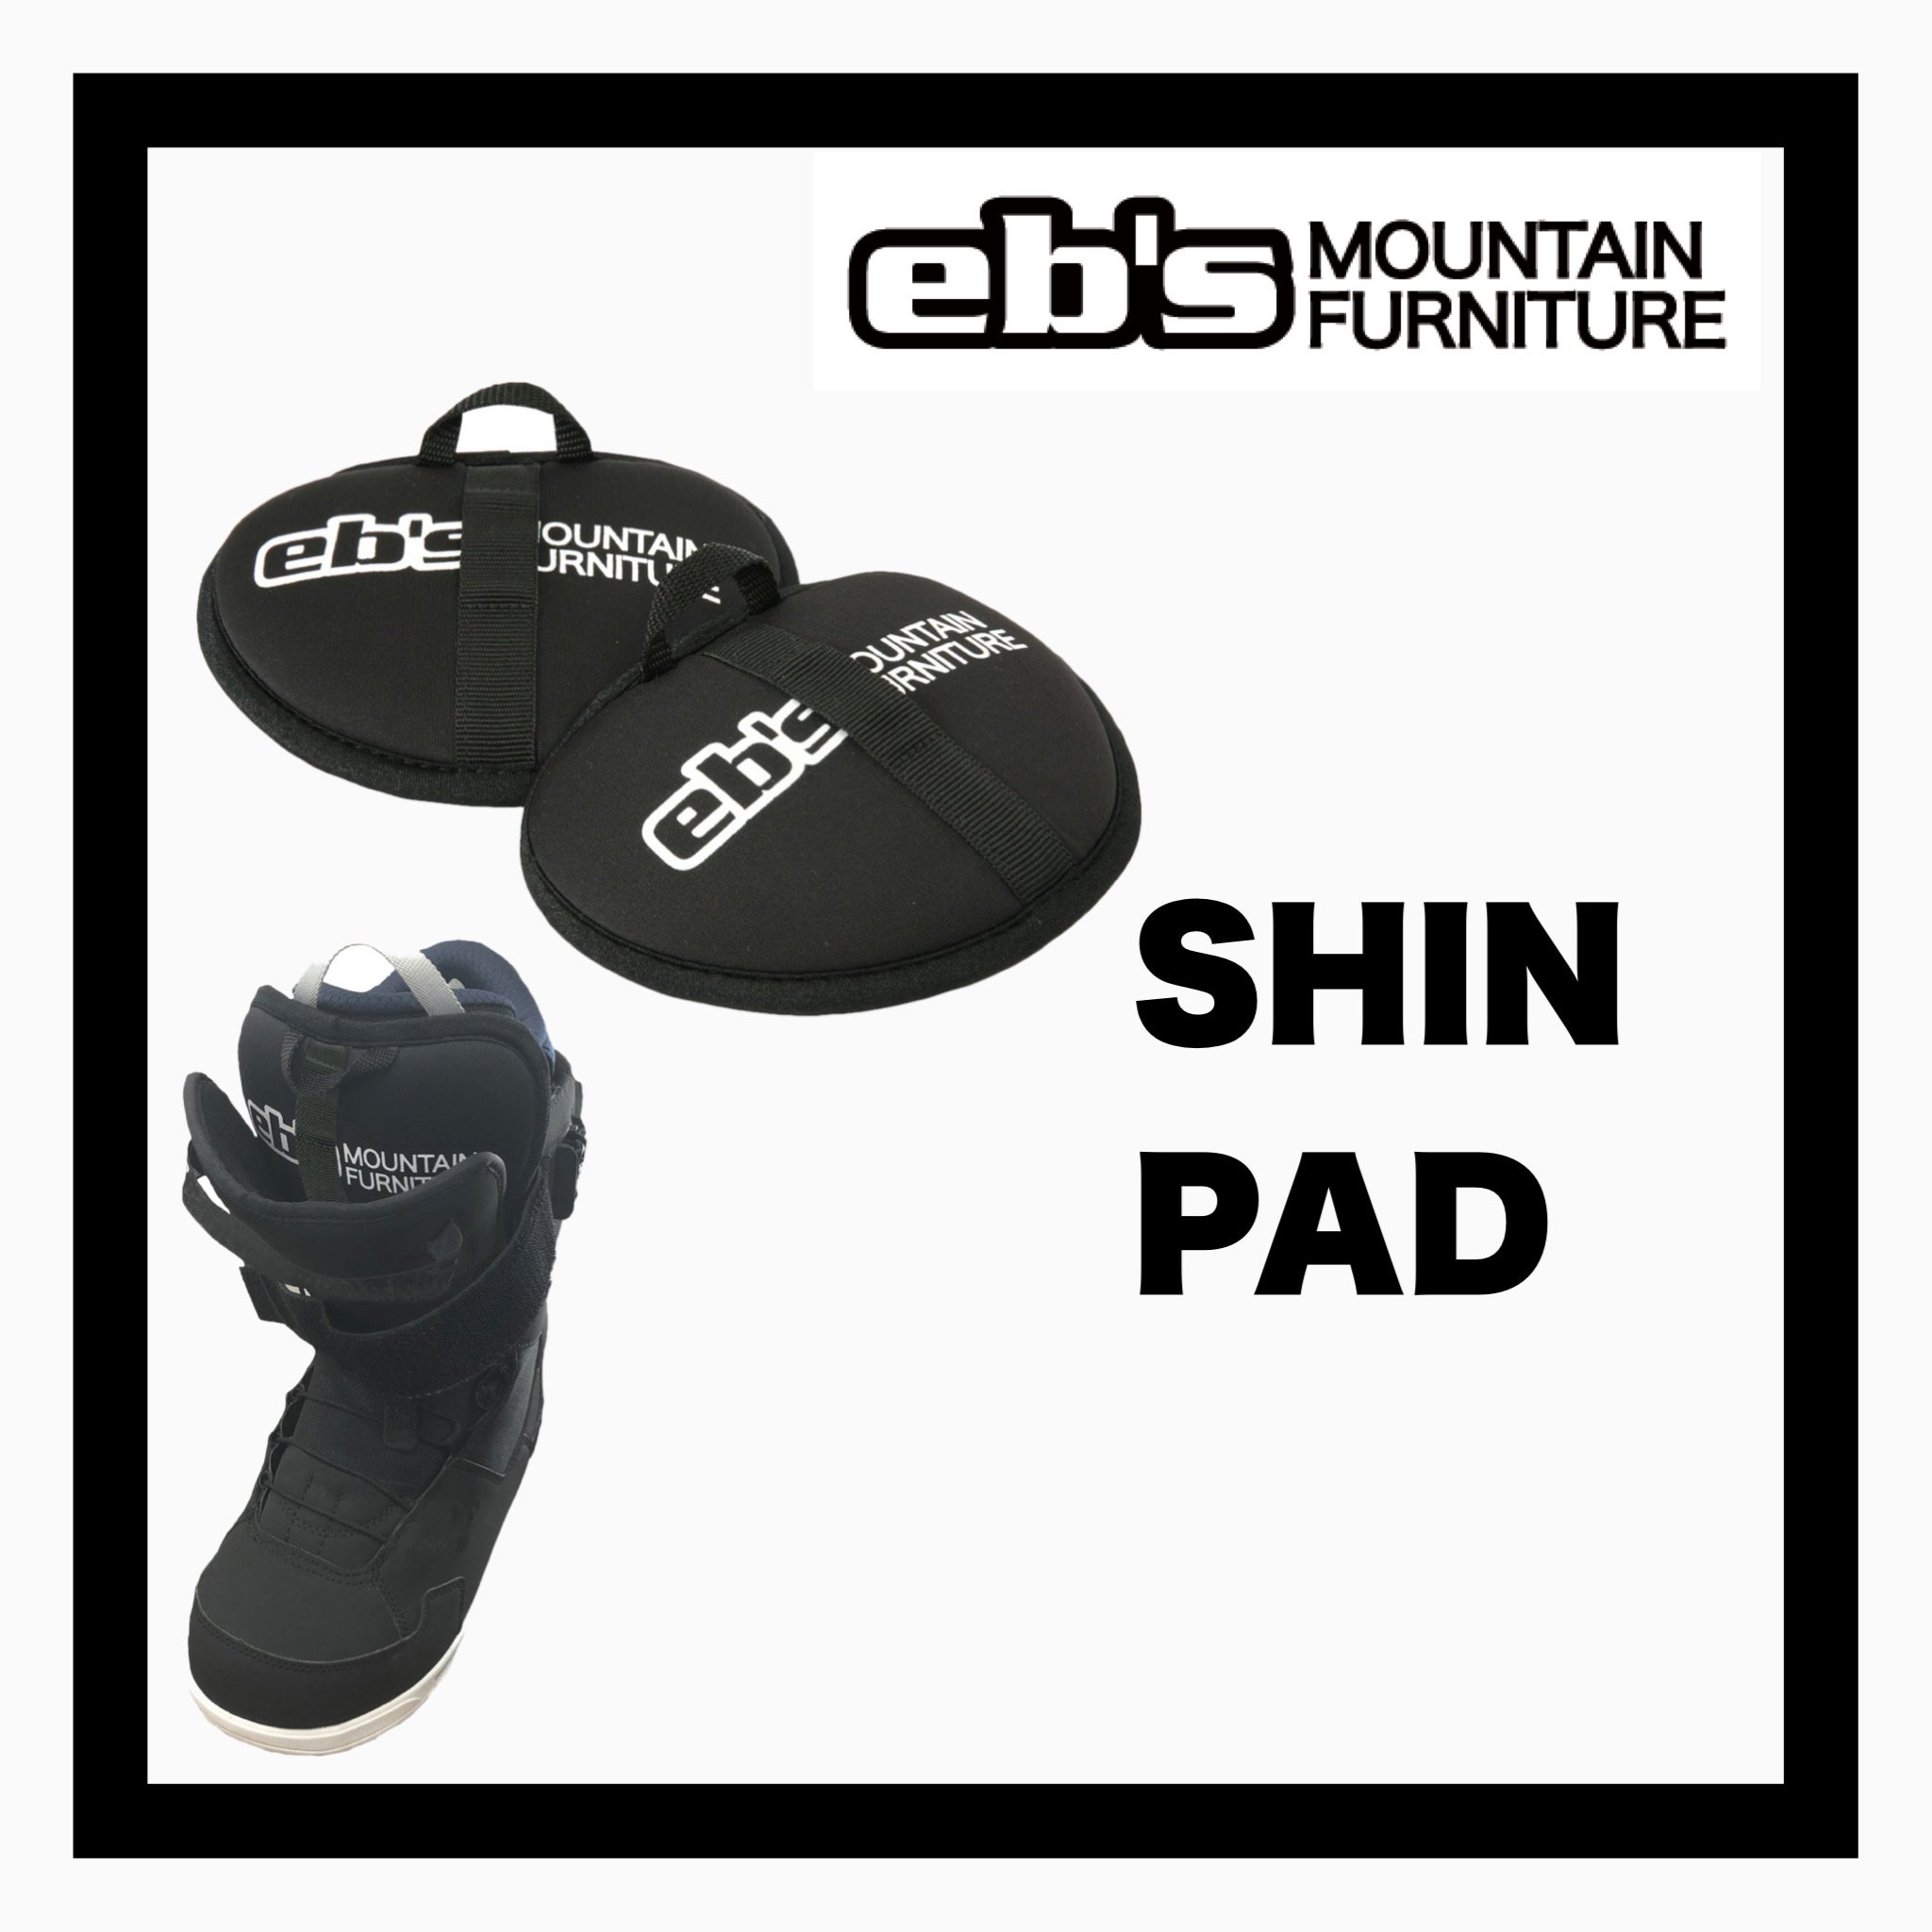 <img class='new_mark_img1' src='https://img.shop-pro.jp/img/new/icons14.gif' style='border:none;display:inline;margin:0px;padding:0px;width:auto;' />eb'sSHIN PAD